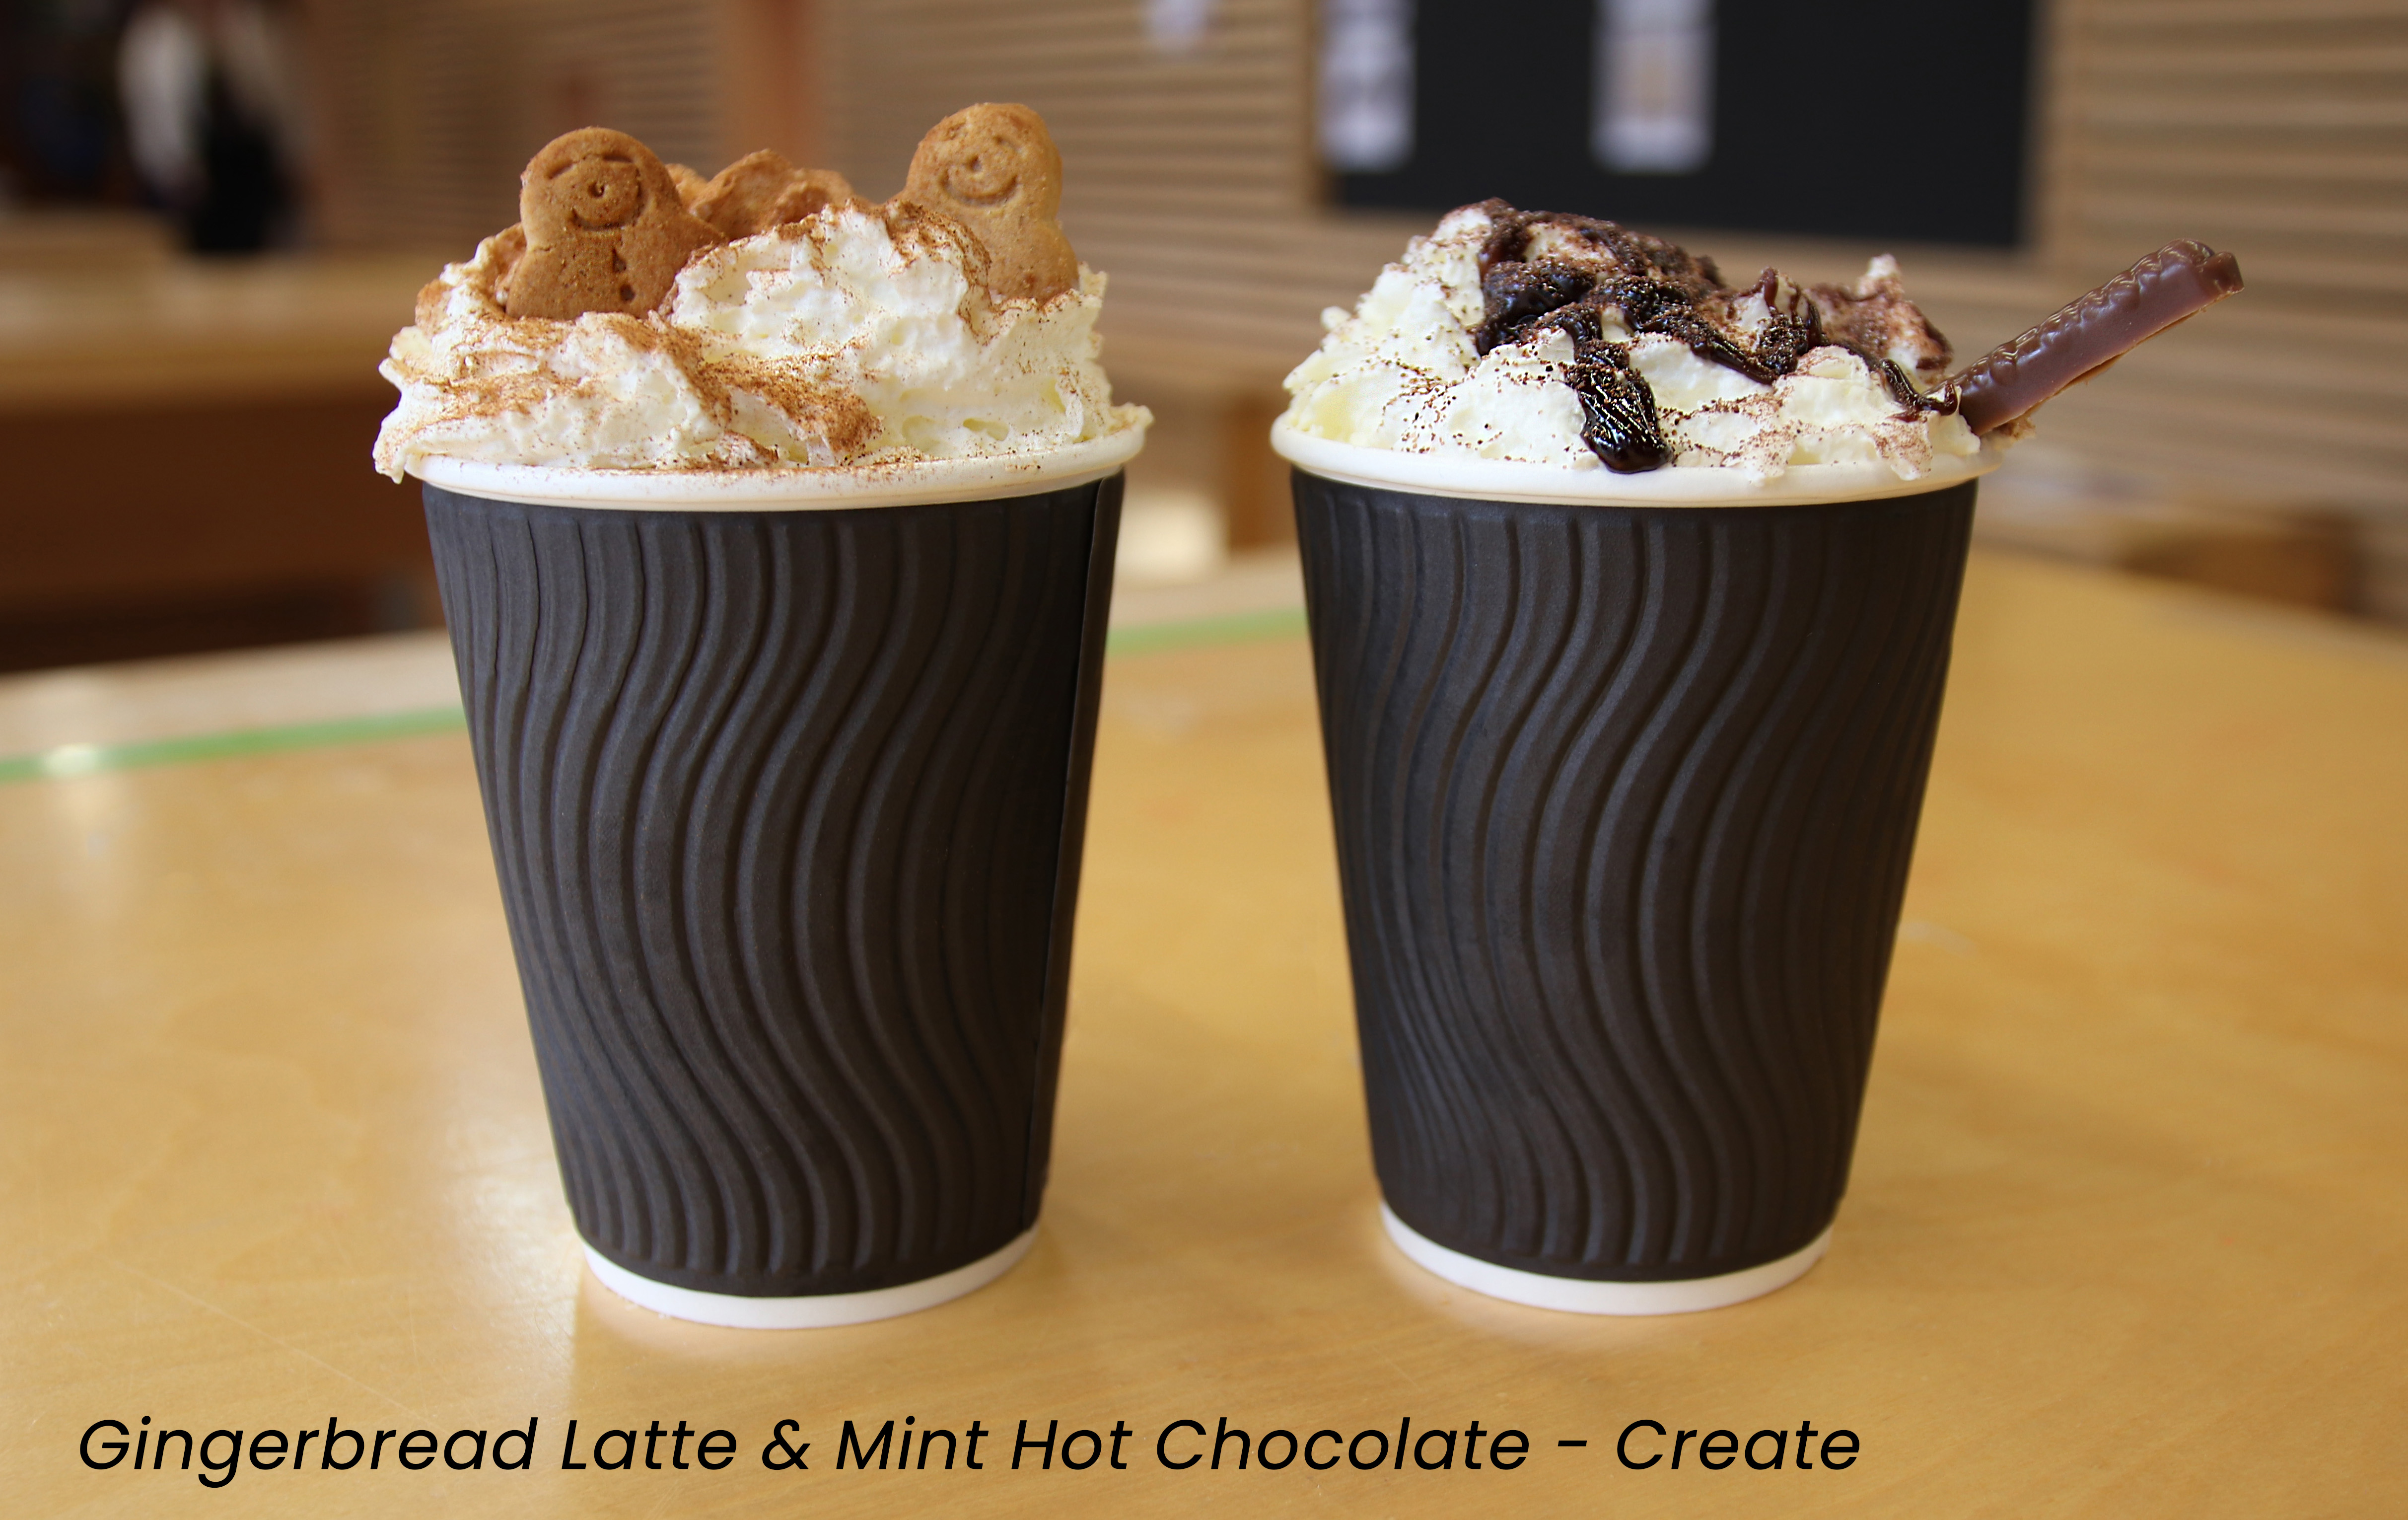 Gingerbread Latte and Mint Hot Chocolate